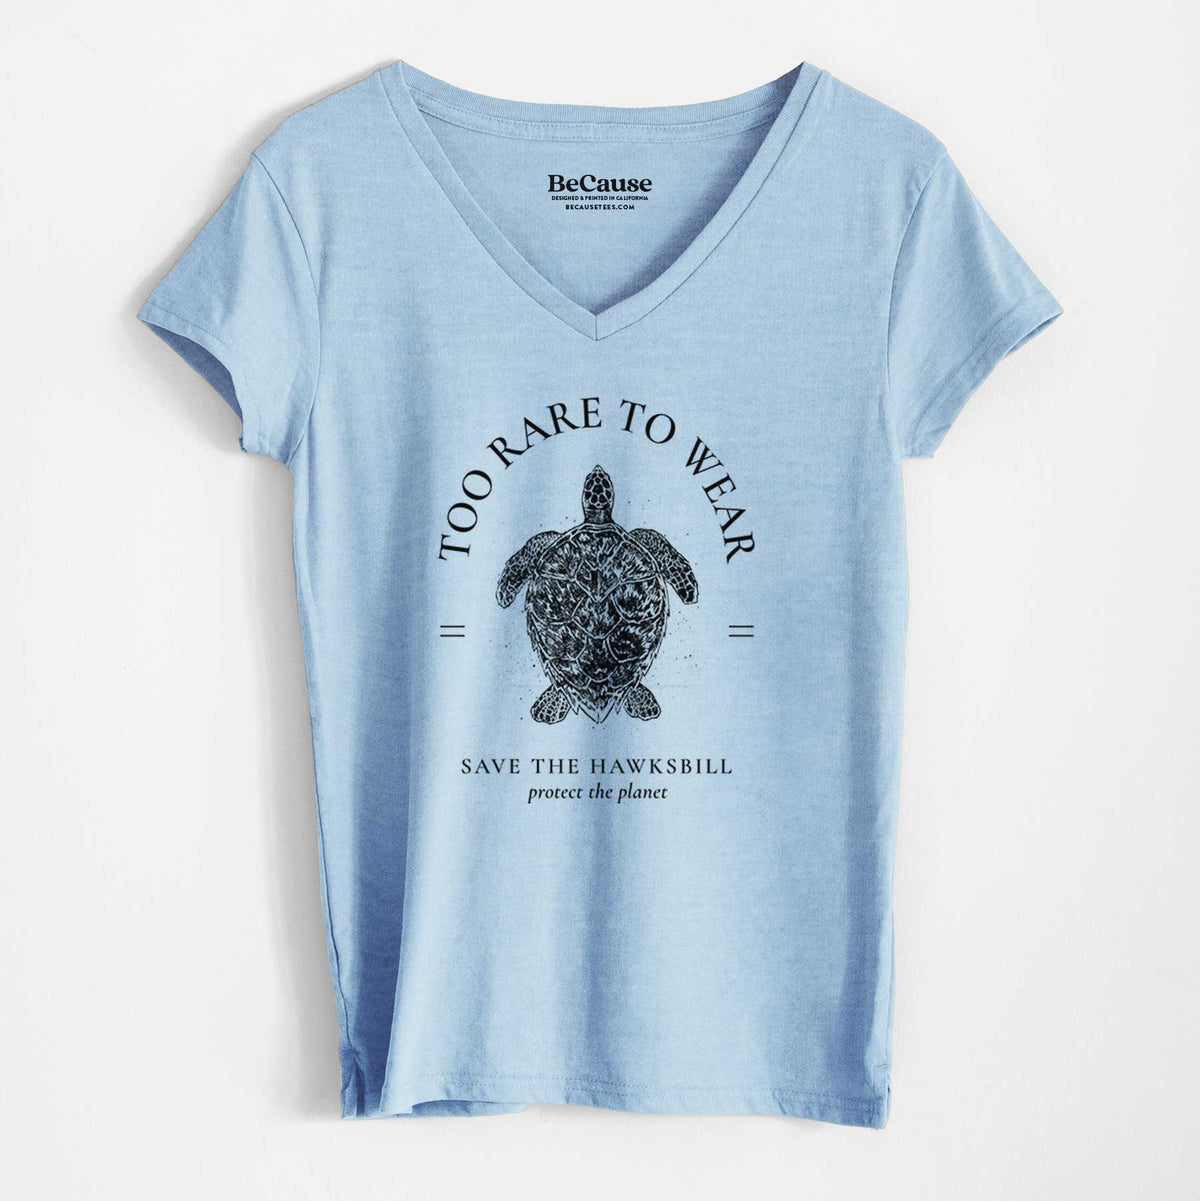 Too Rare to Wear - Save the Hawksbill - Women&#39;s 100% Recycled V-neck